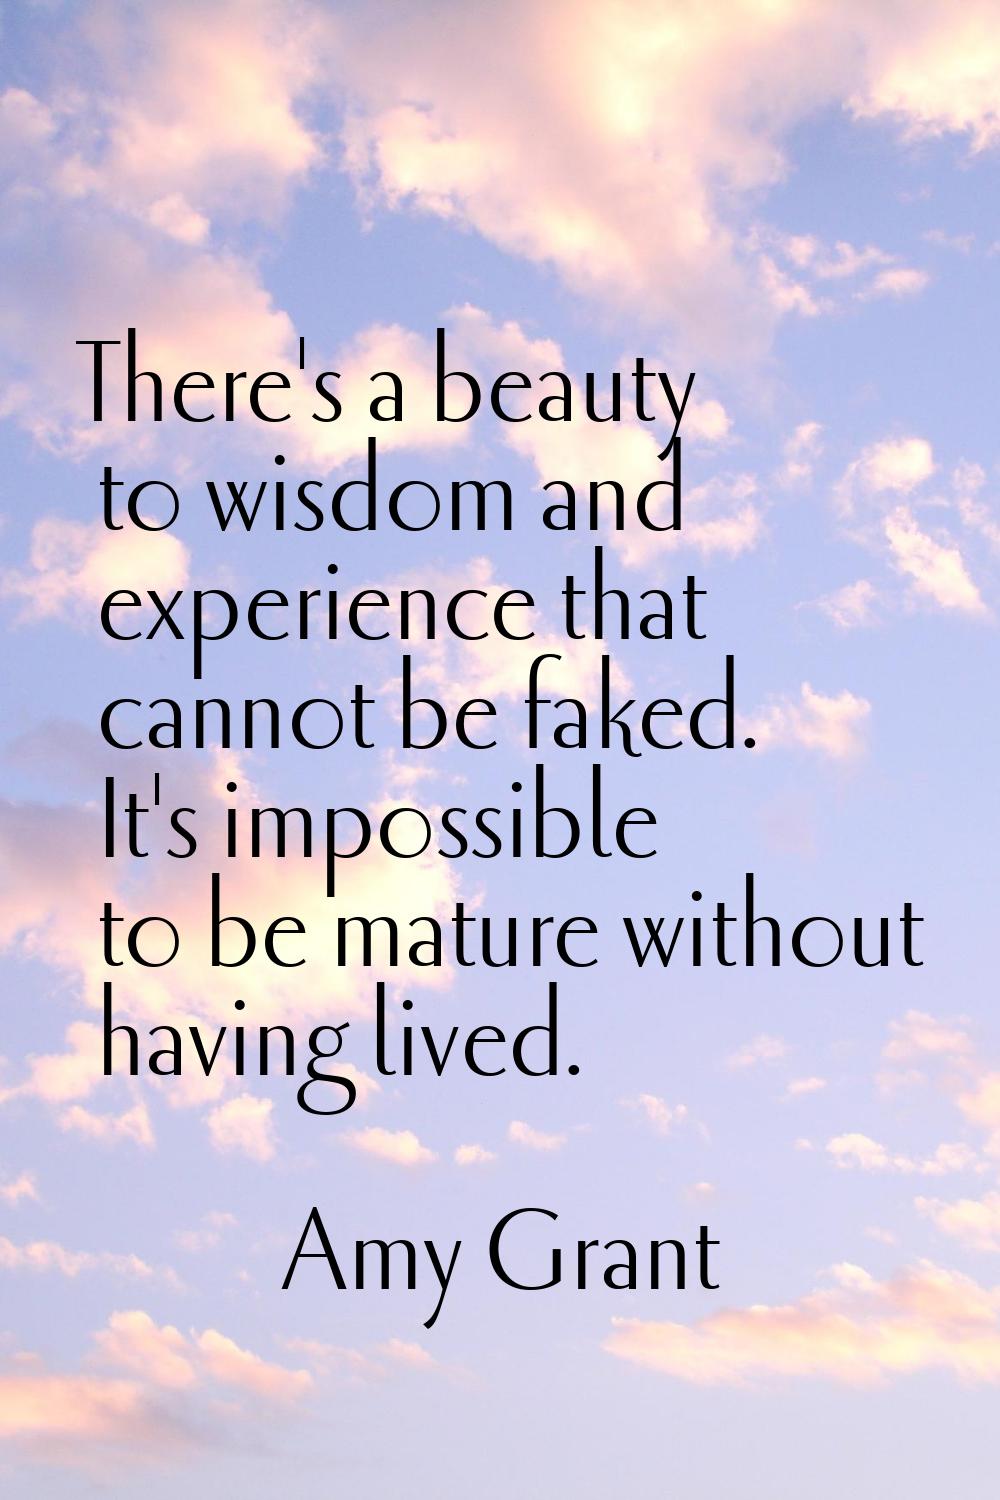 There's a beauty to wisdom and experience that cannot be faked. It's impossible to be mature withou